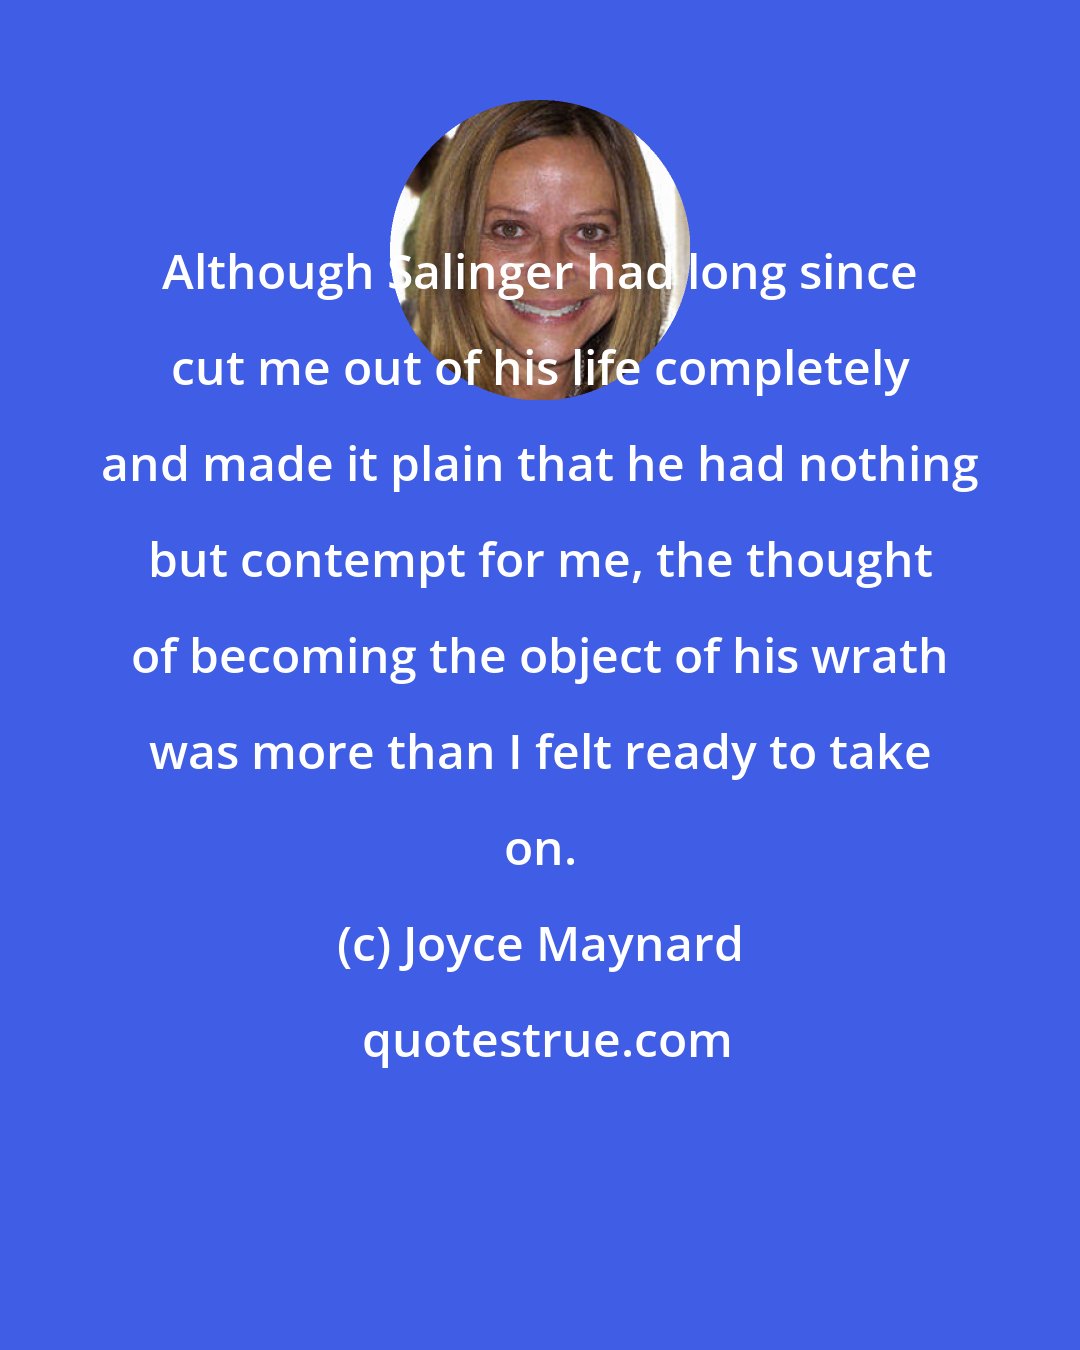 Joyce Maynard: Although Salinger had long since cut me out of his life completely and made it plain that he had nothing but contempt for me, the thought of becoming the object of his wrath was more than I felt ready to take on.